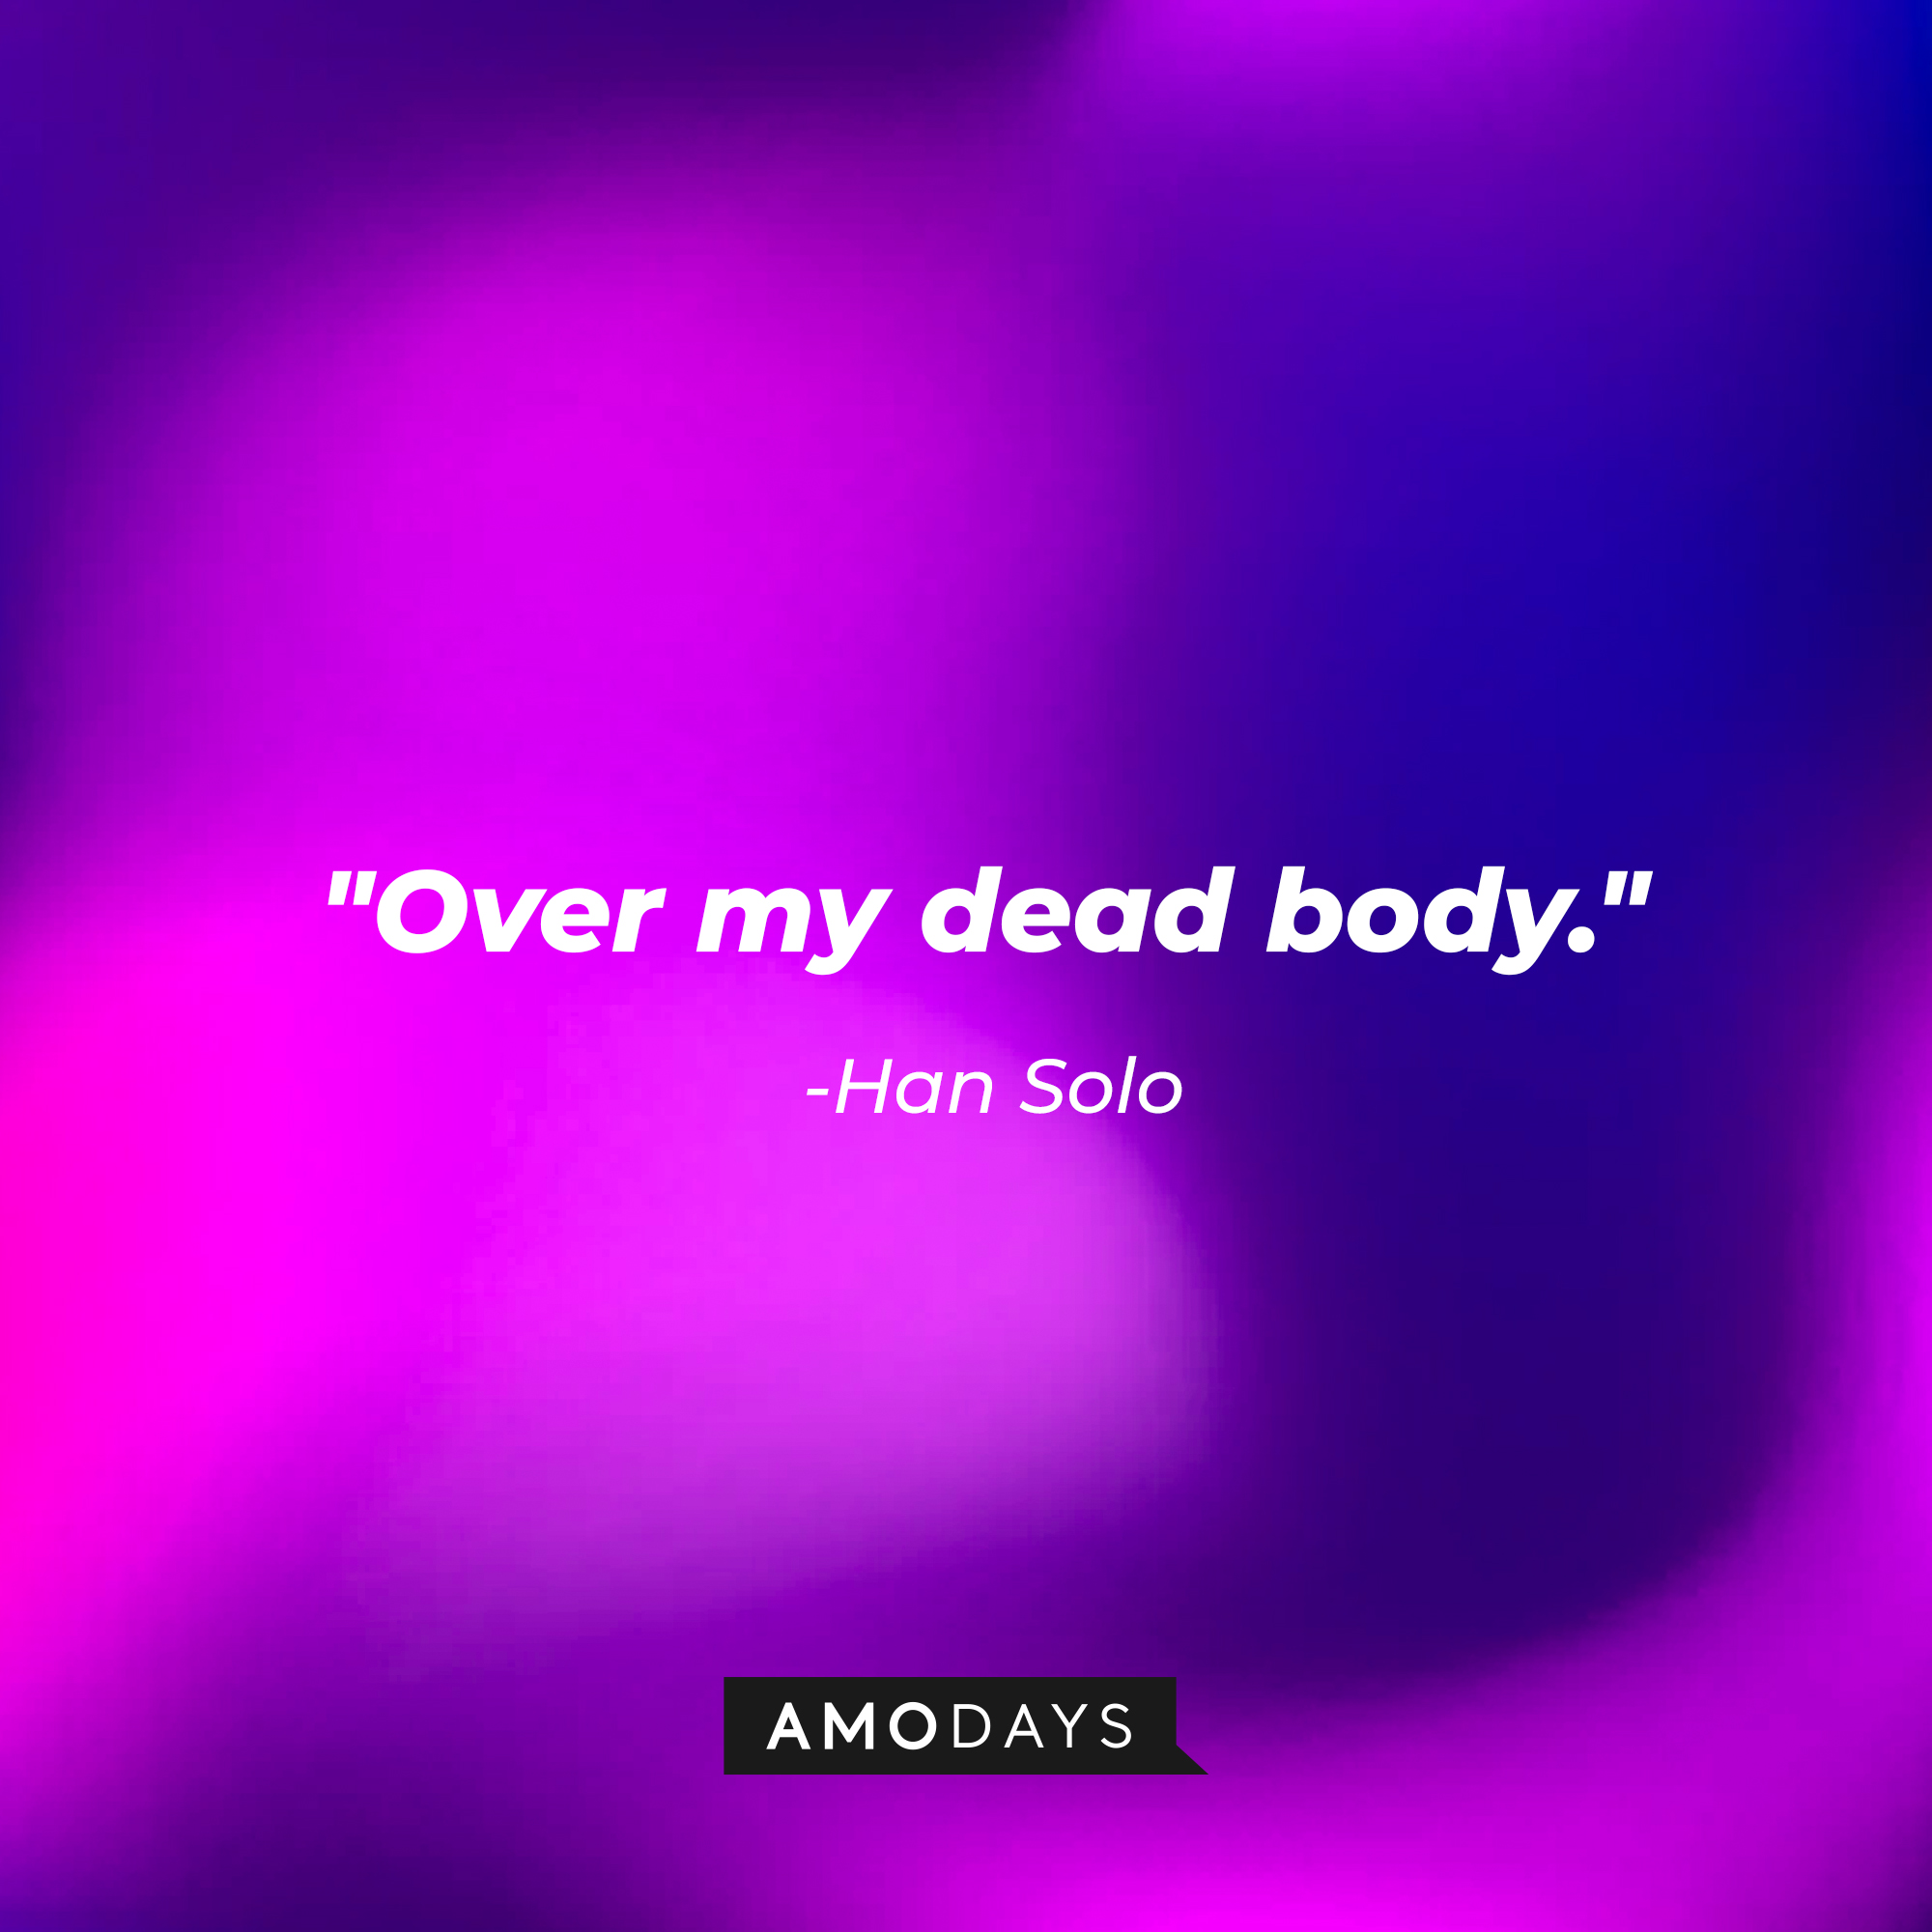 Han Solo’s quote: "Over my dead body." | Source: AmoDays